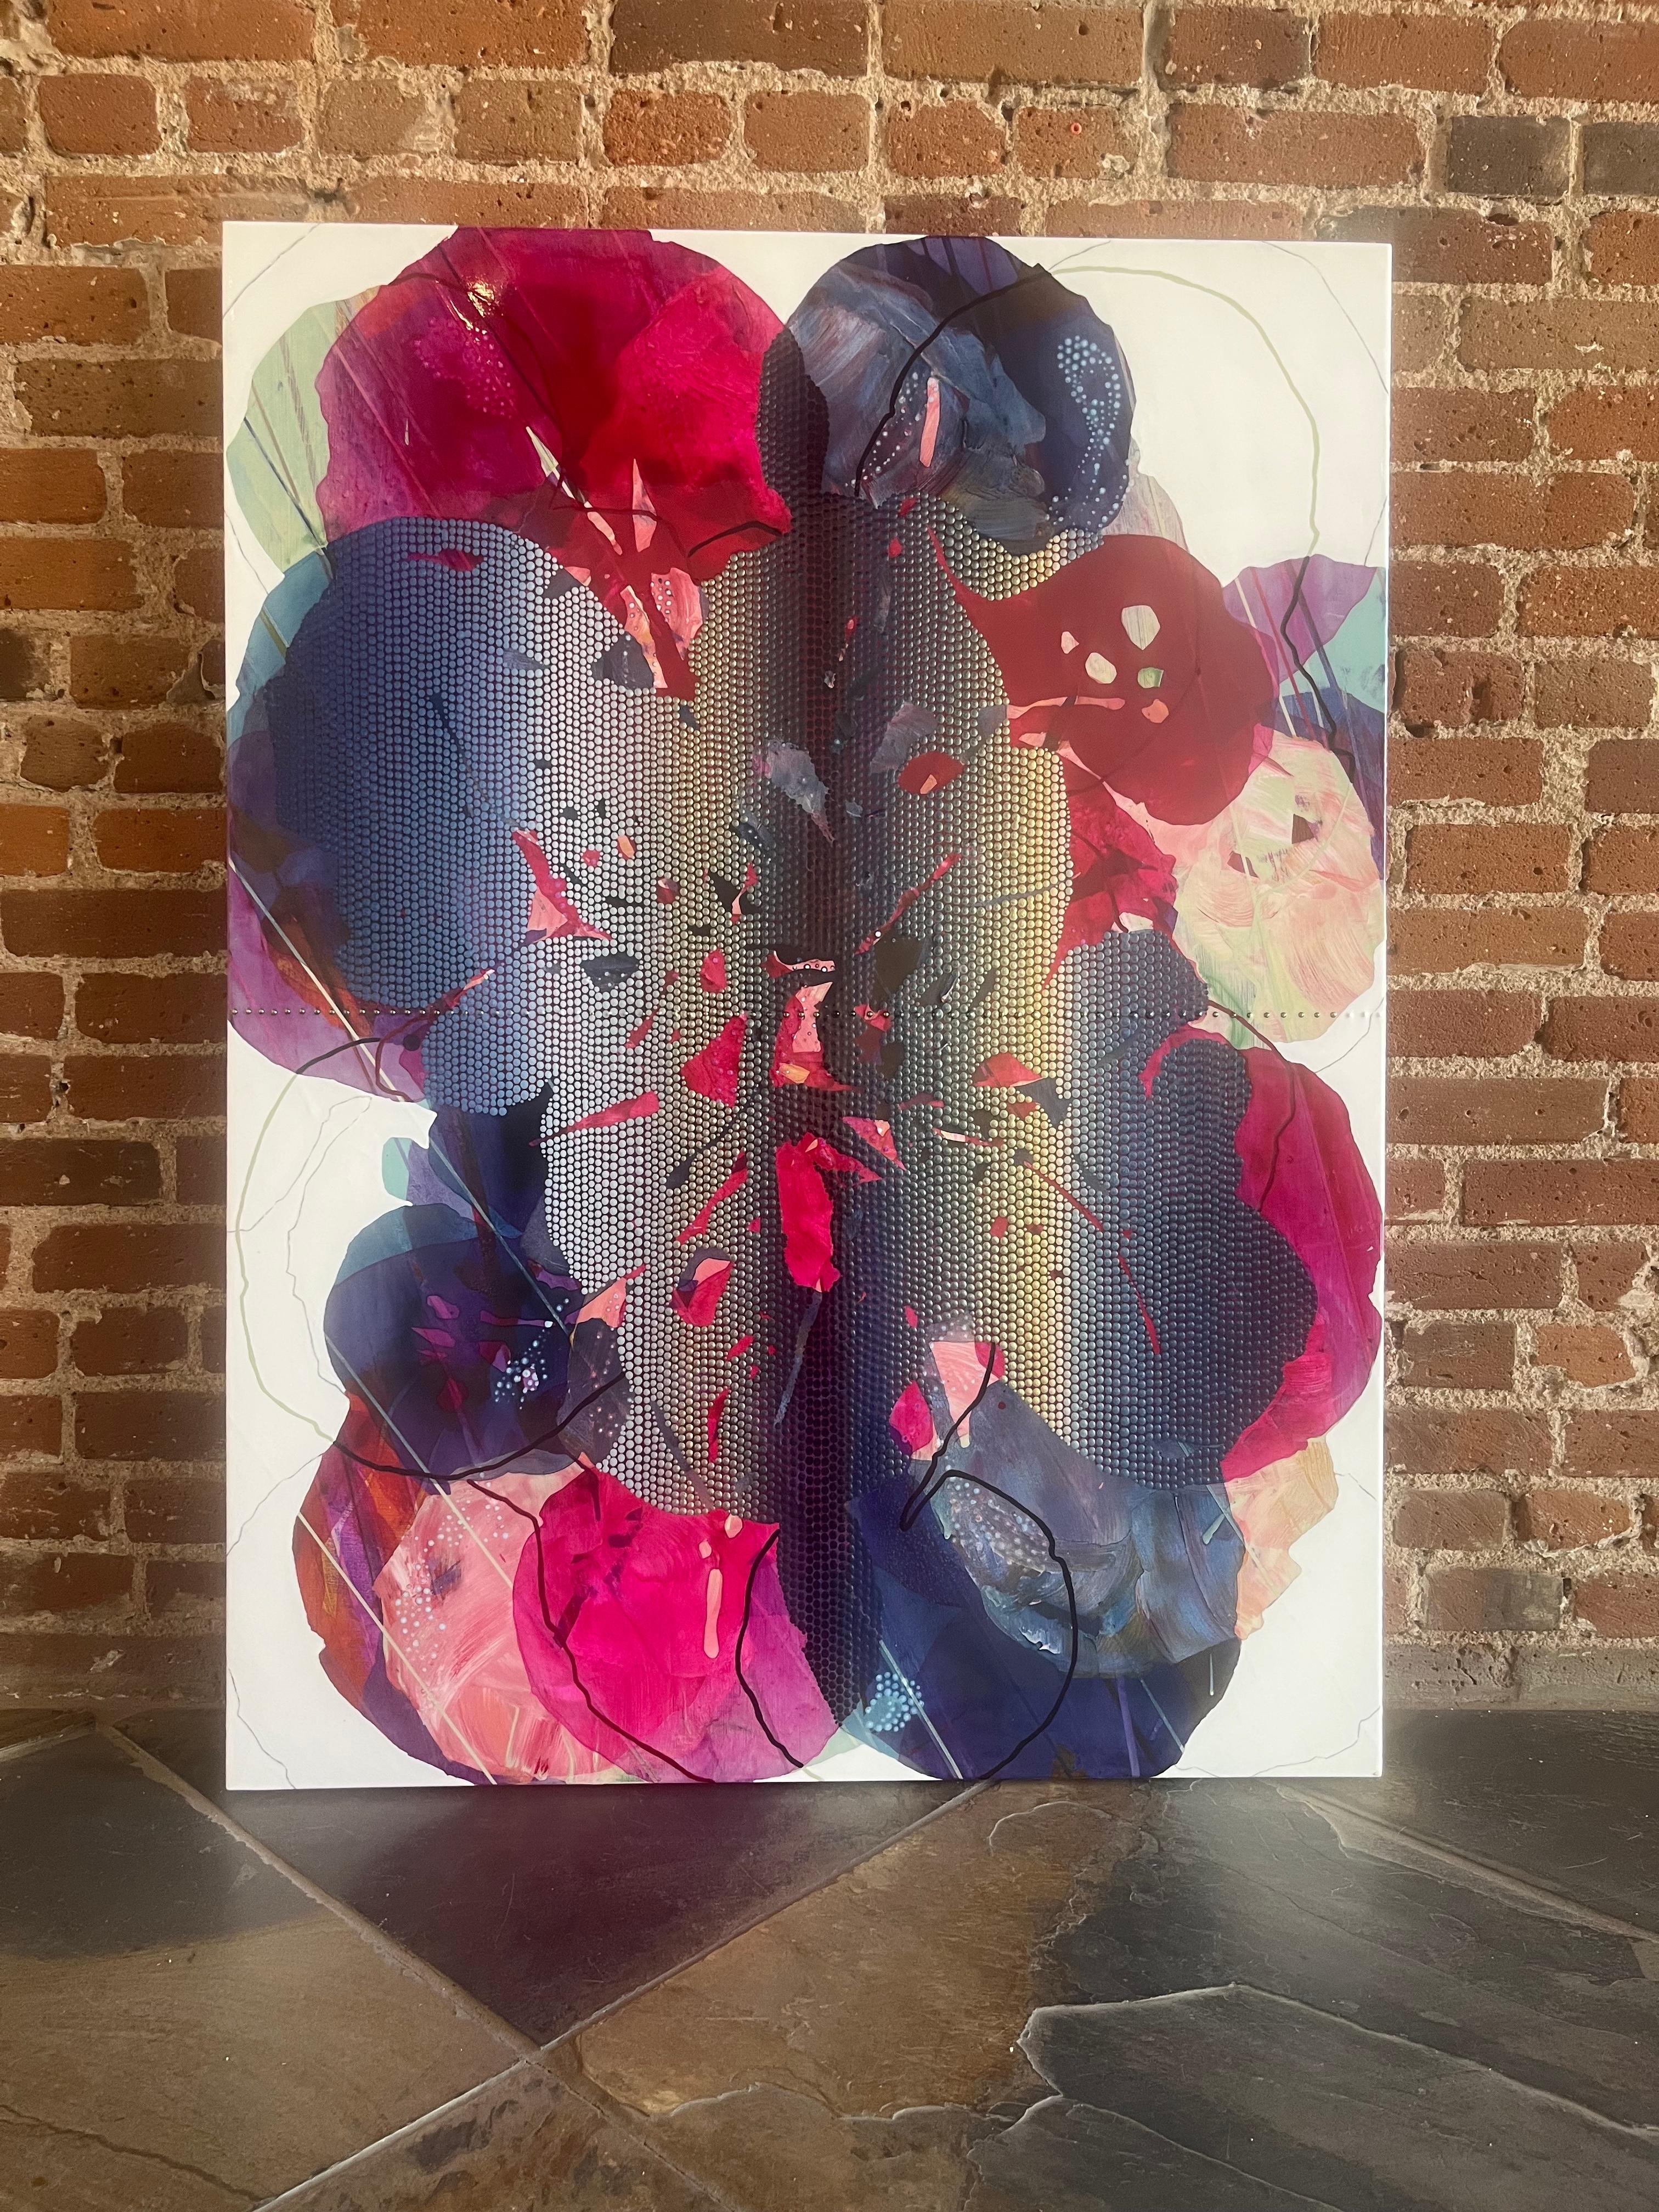 This magenta and purple hued work by Nina Tichava uses layers of disparate materials, including metal grommets and a juicy lacquered surface, to create an abstract composition reminiscent of a flower. It is unframed and created on a wooden panel,